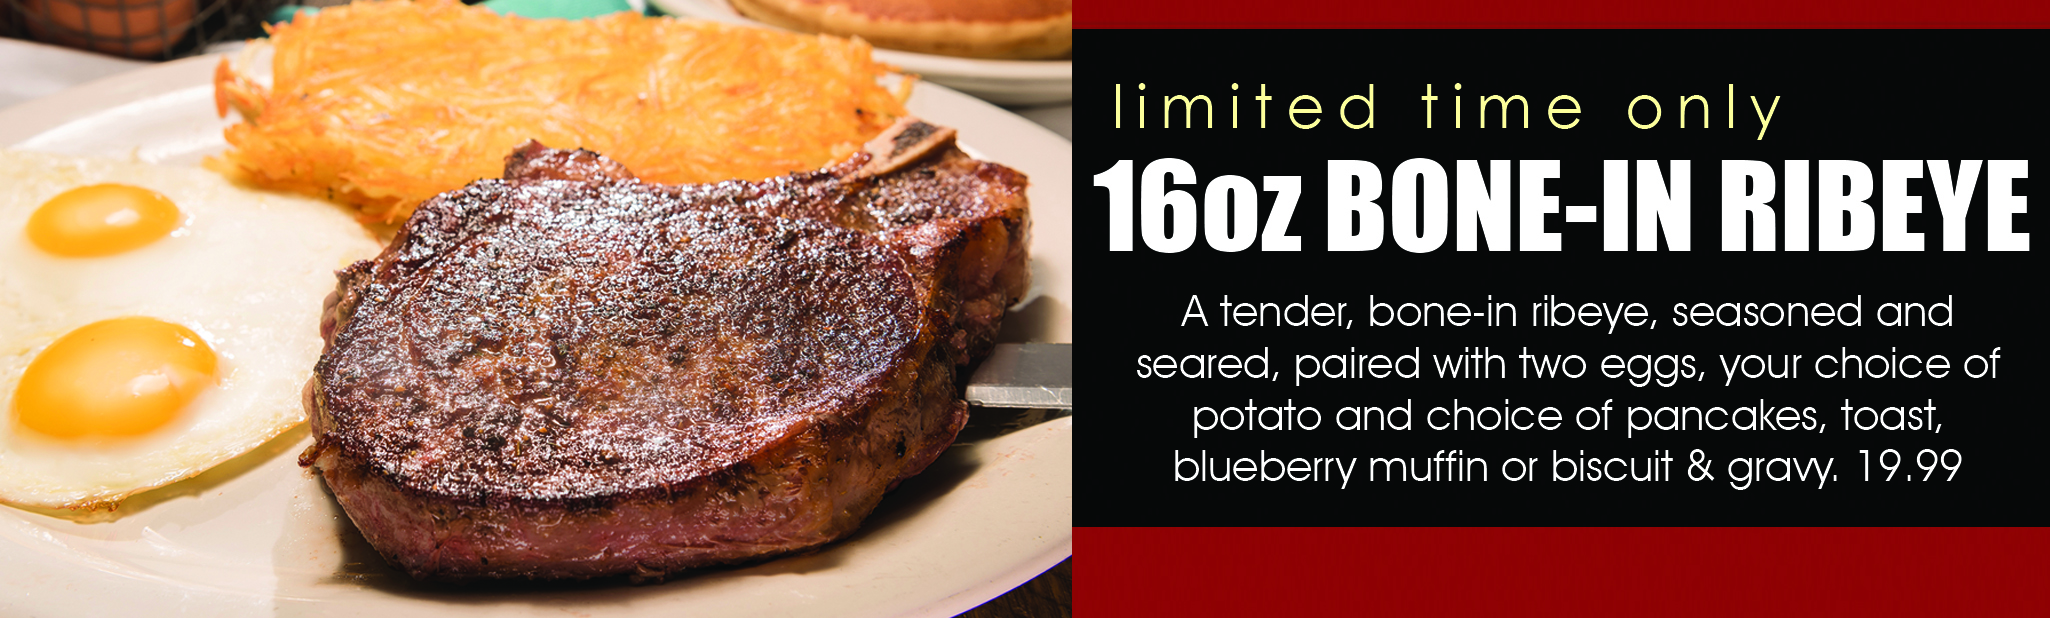 16 ounce bone-in ribeye, for a limited time only